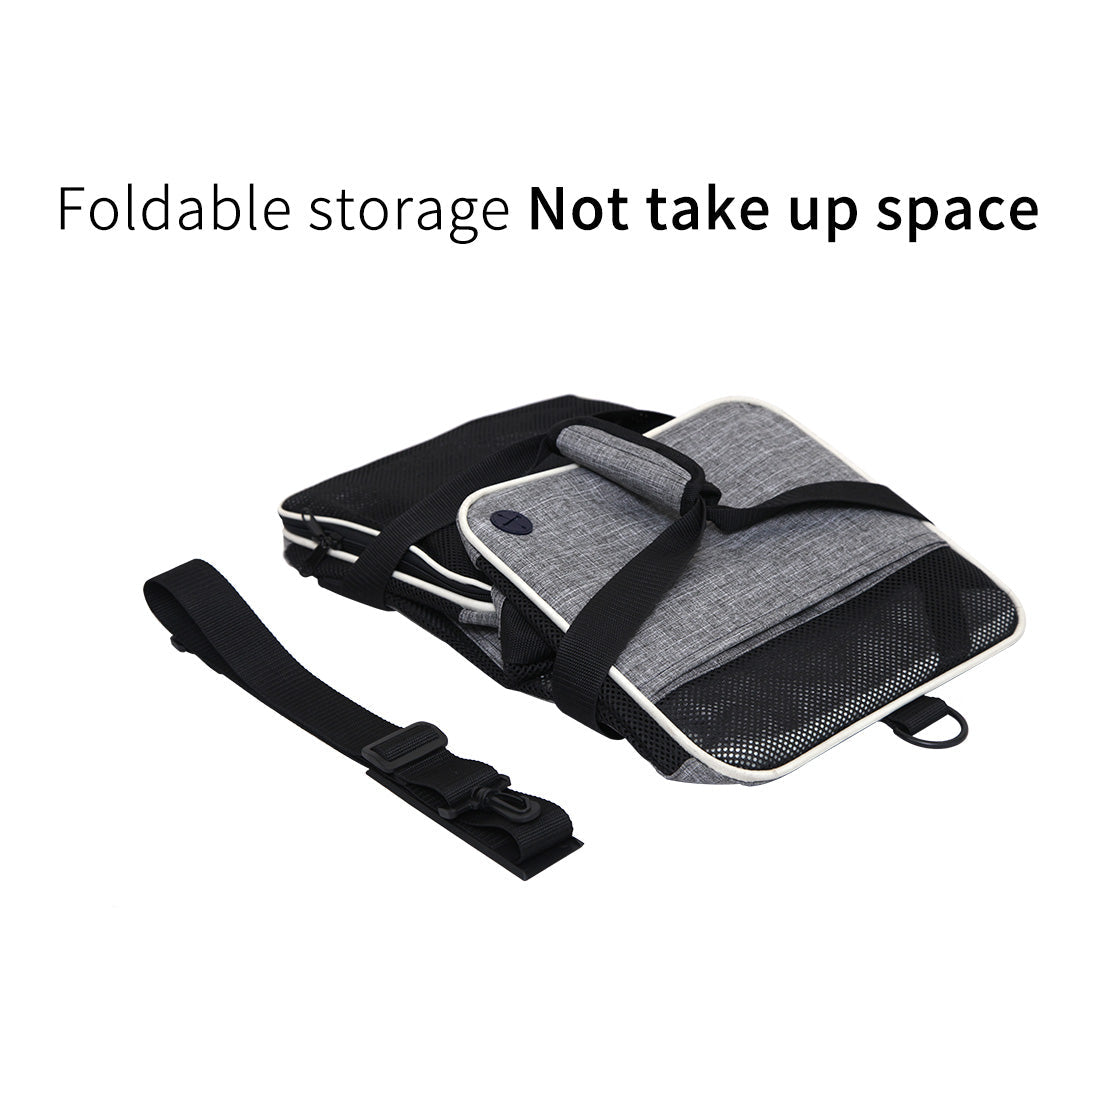 Foldable Pet Carrier Bag For Cat & Small Dog